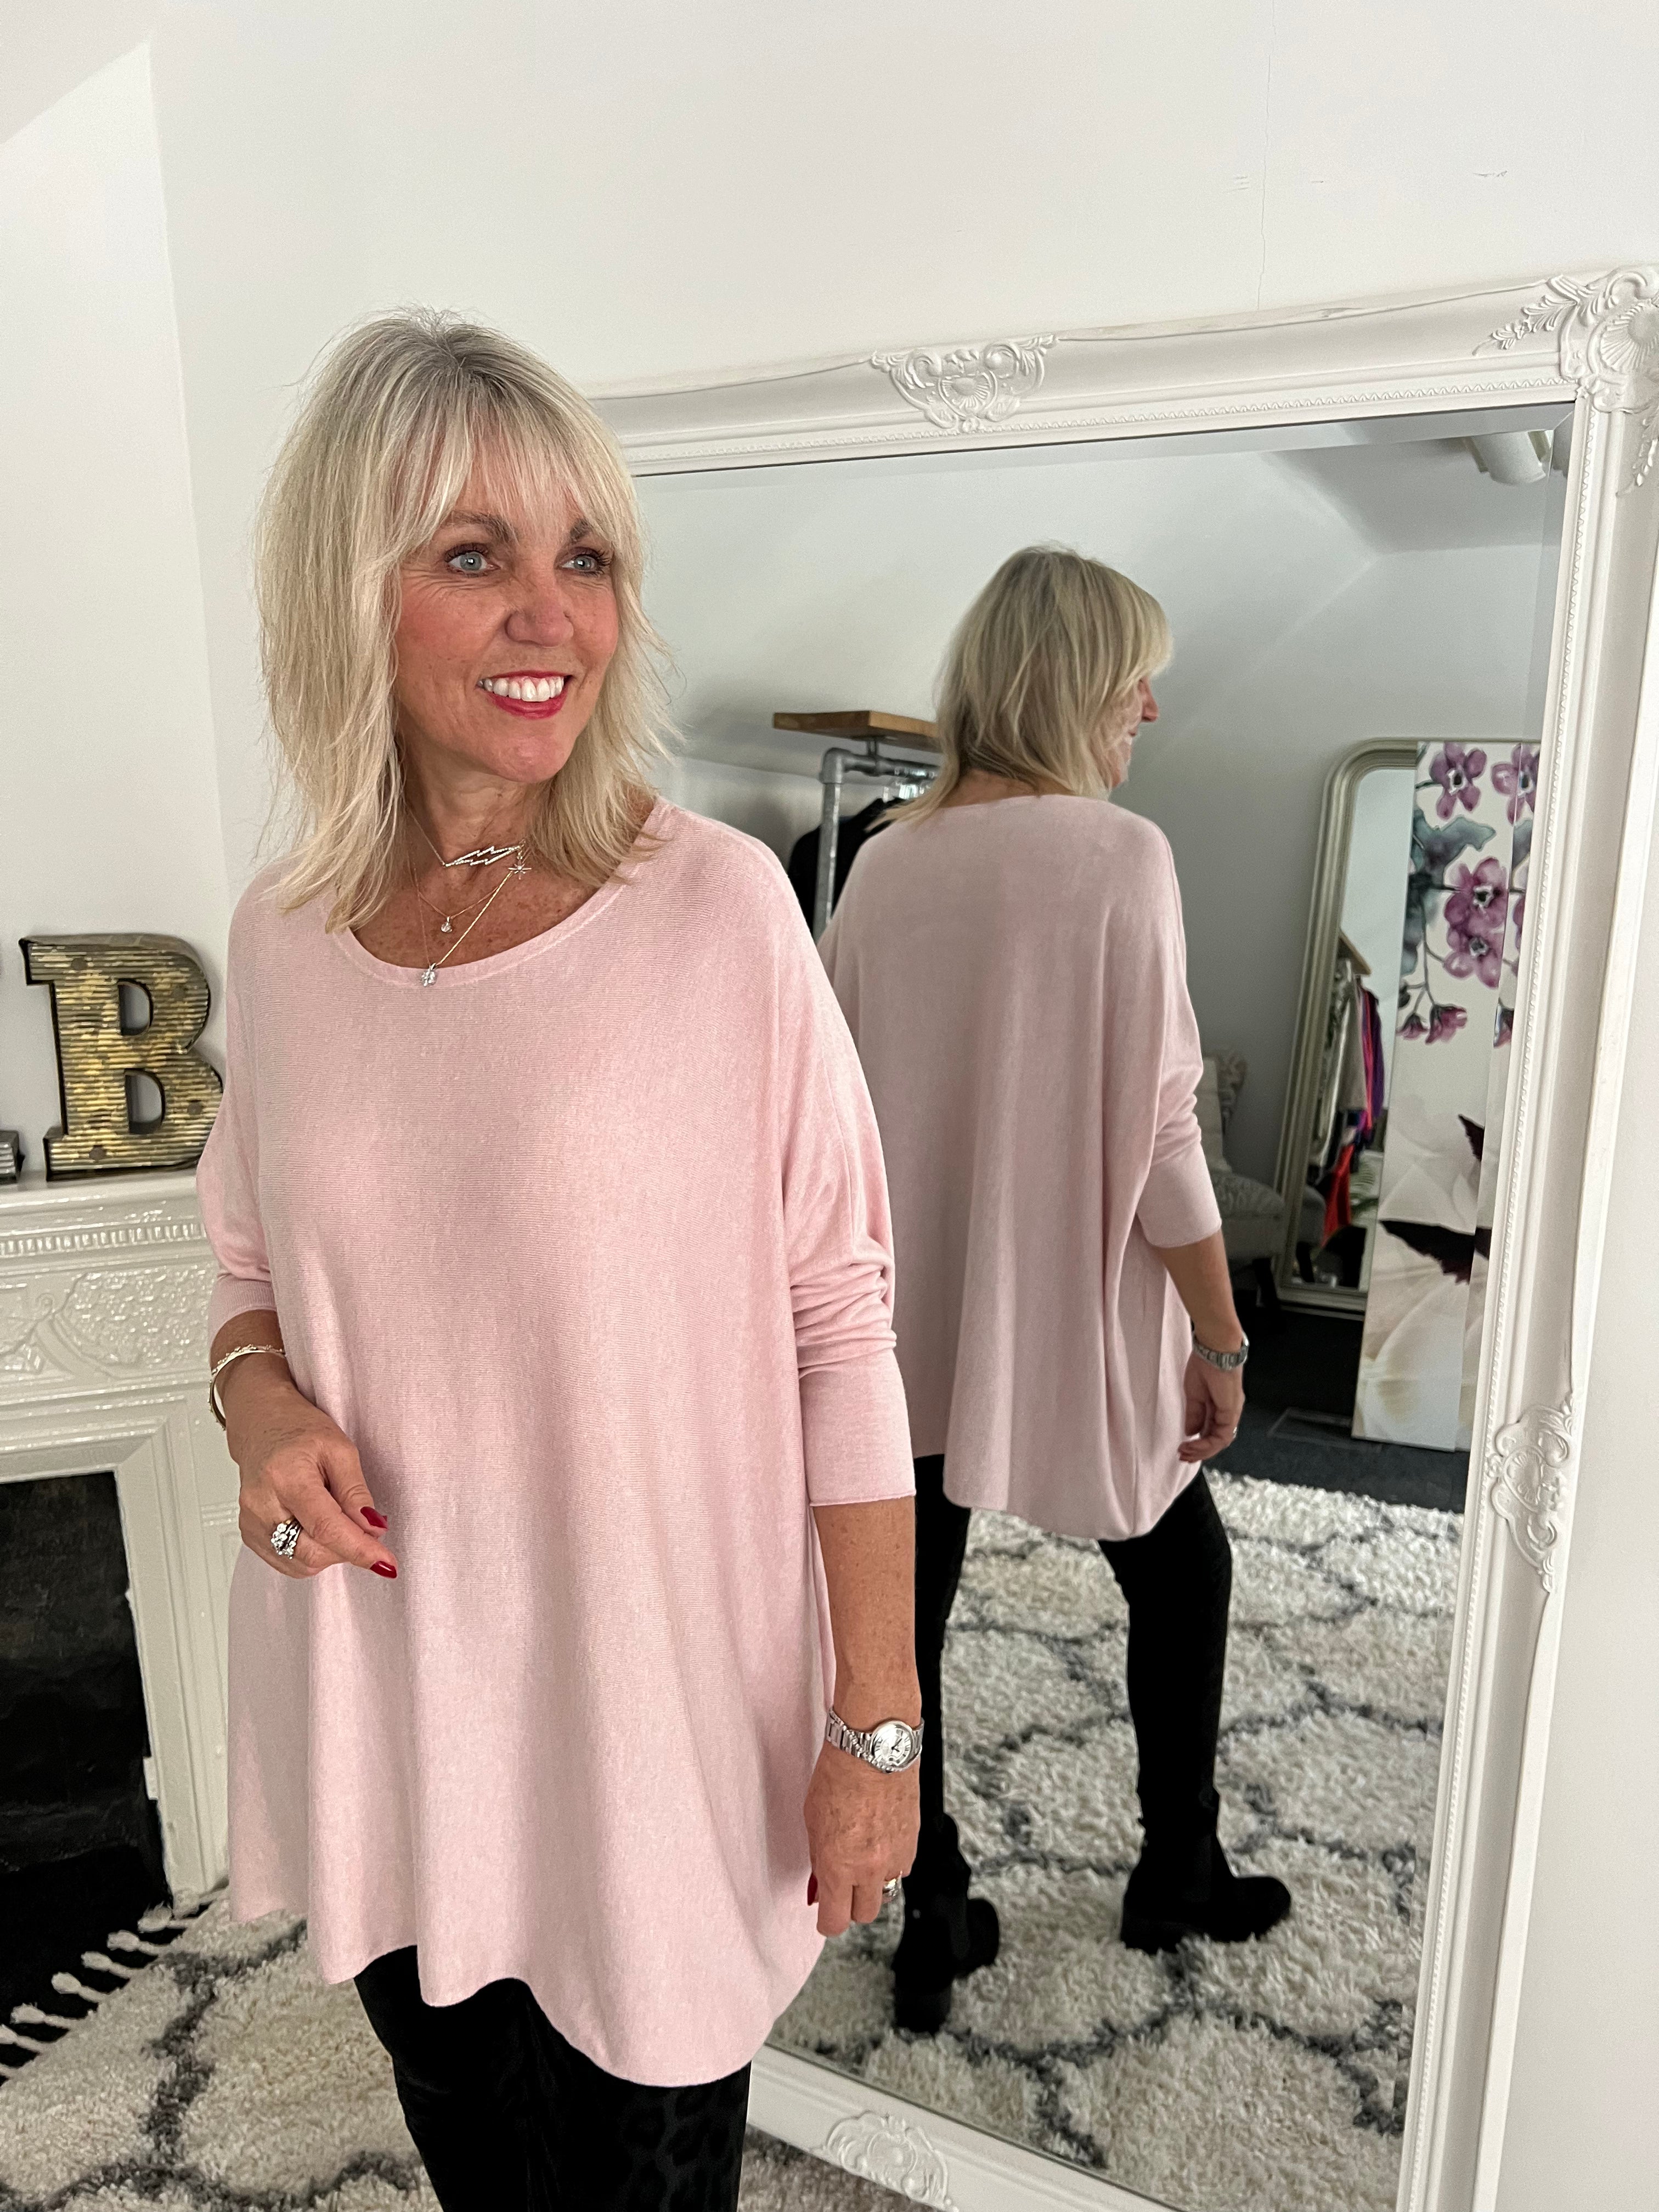 Simple Oversized Jumper in Pale Pink